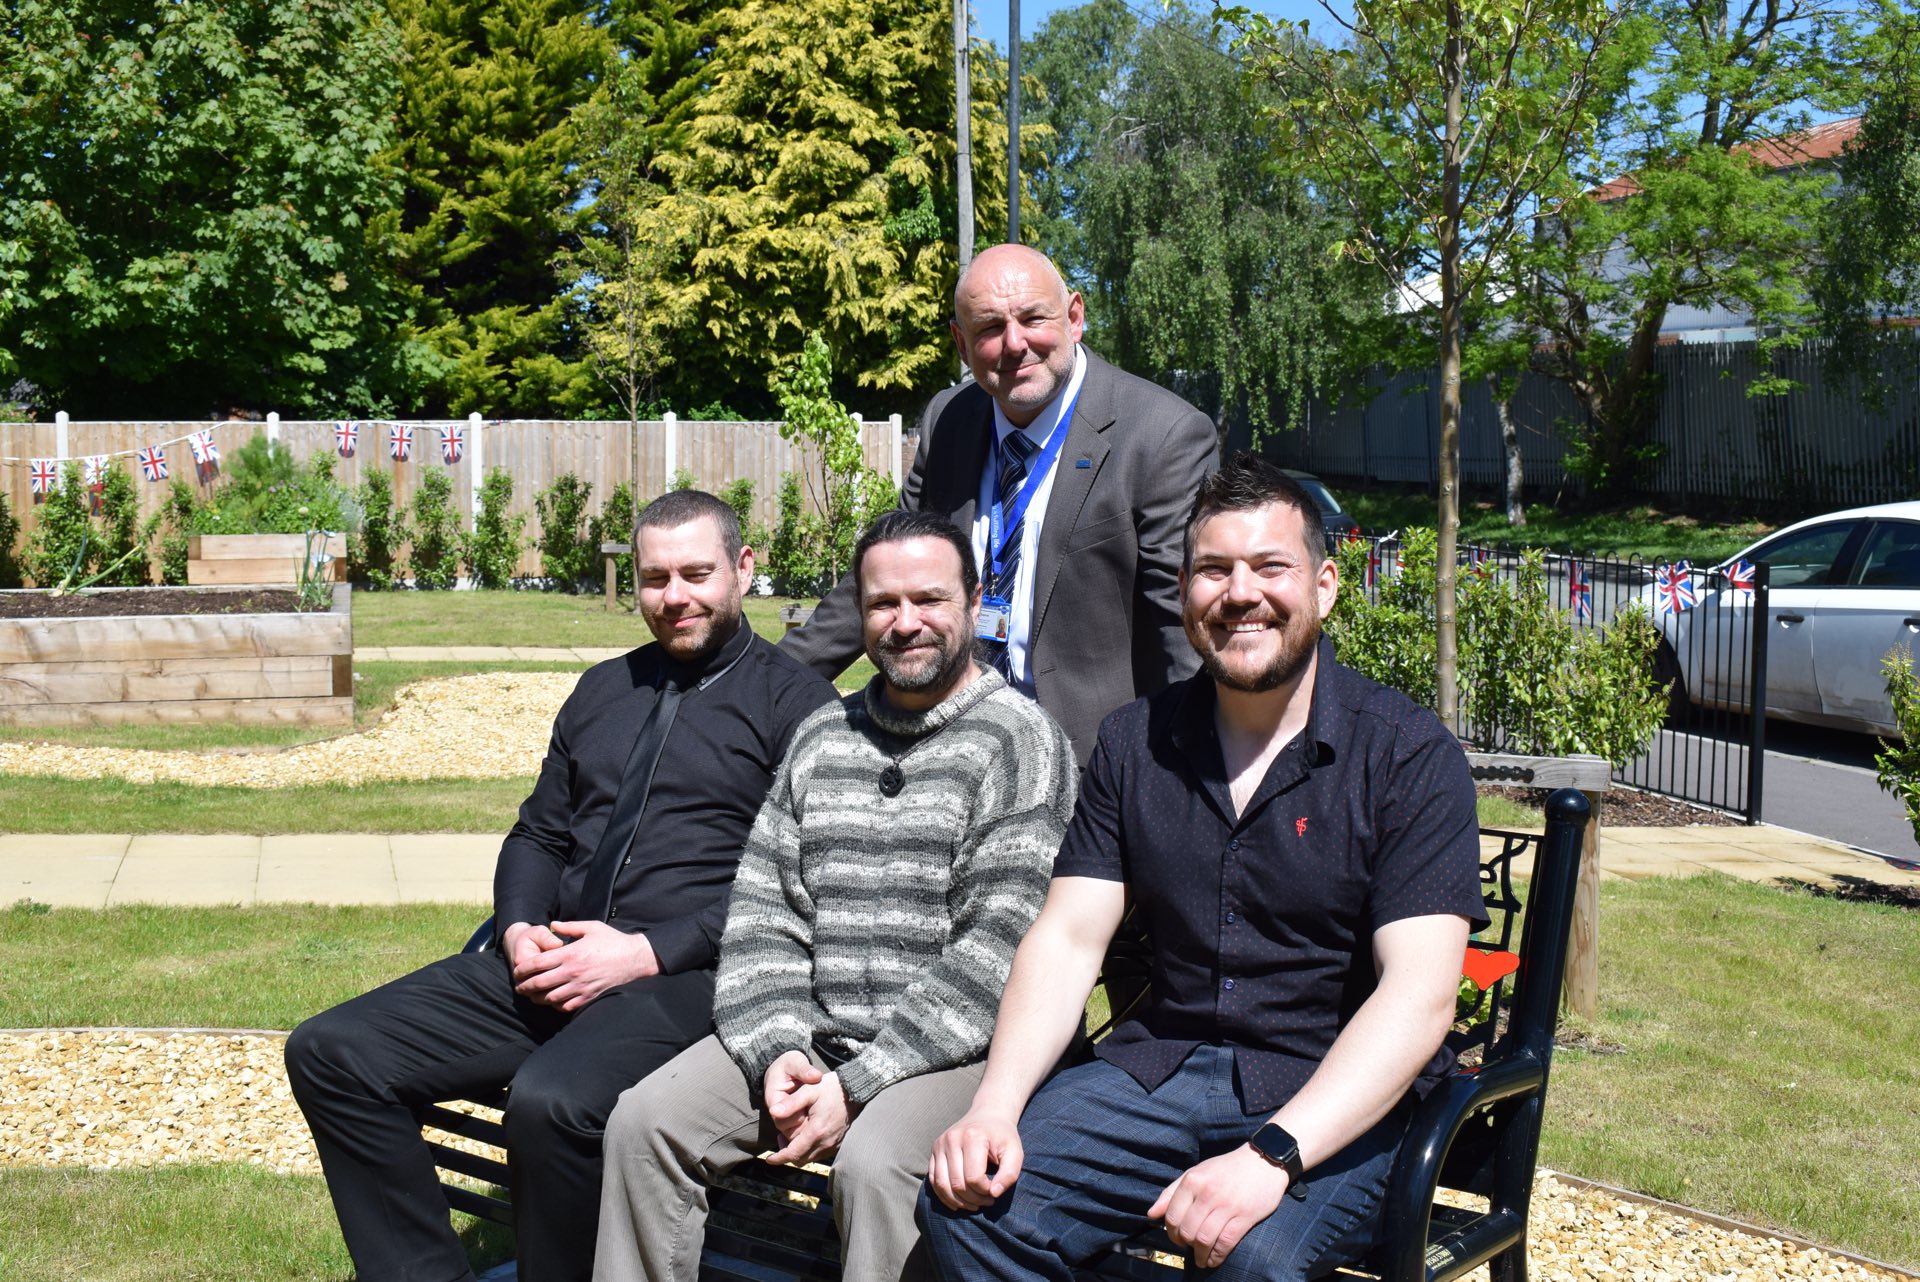 Veterans from the Self-build scheme